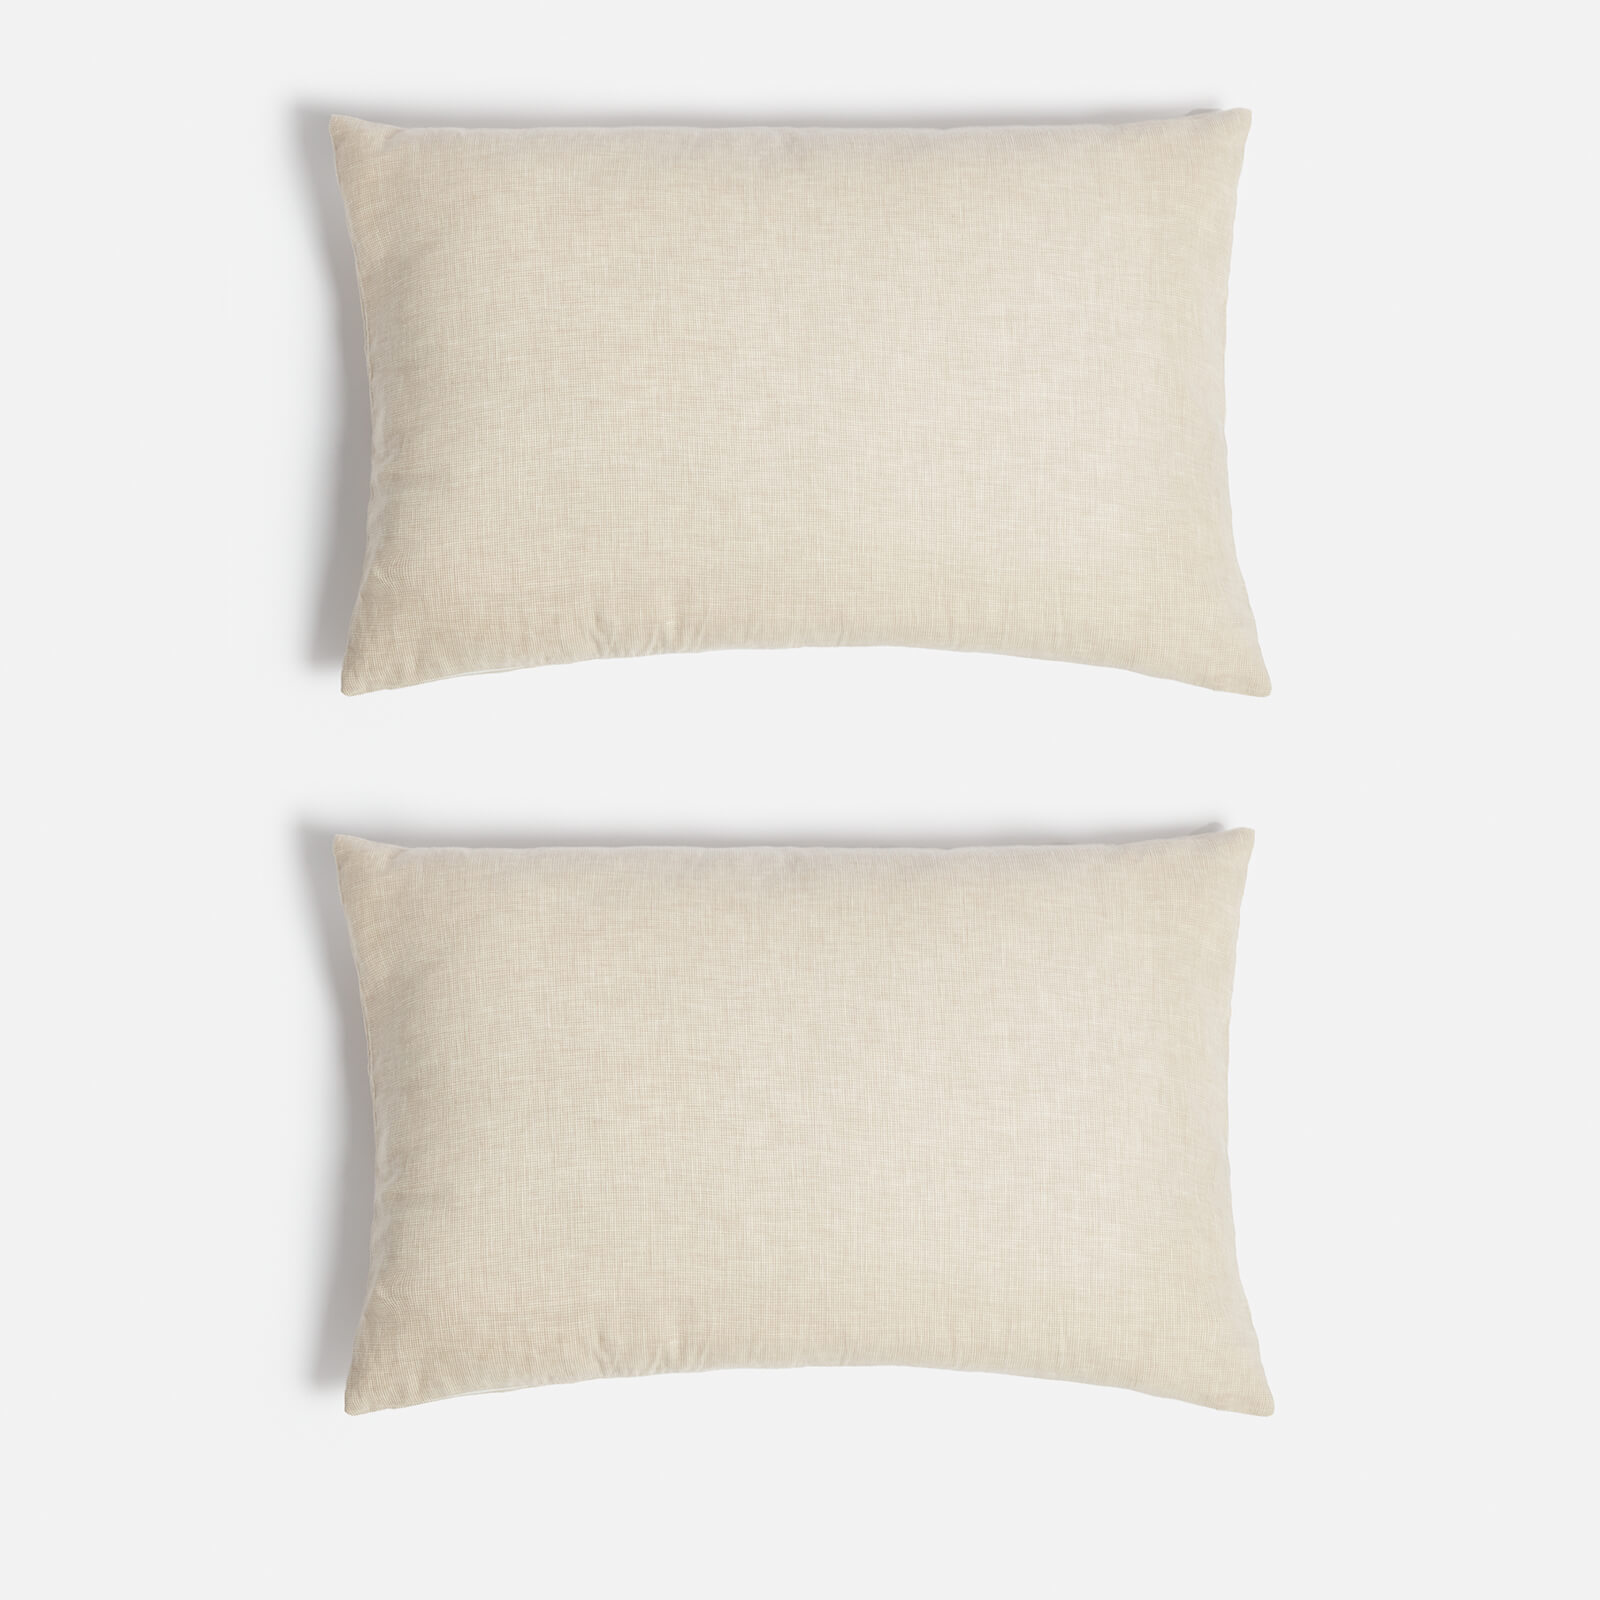 Photos - Pillow InHome ïn home Linen Cotton Cushion Cover - Natural - 75x50cm - Set of 2 IN214959 